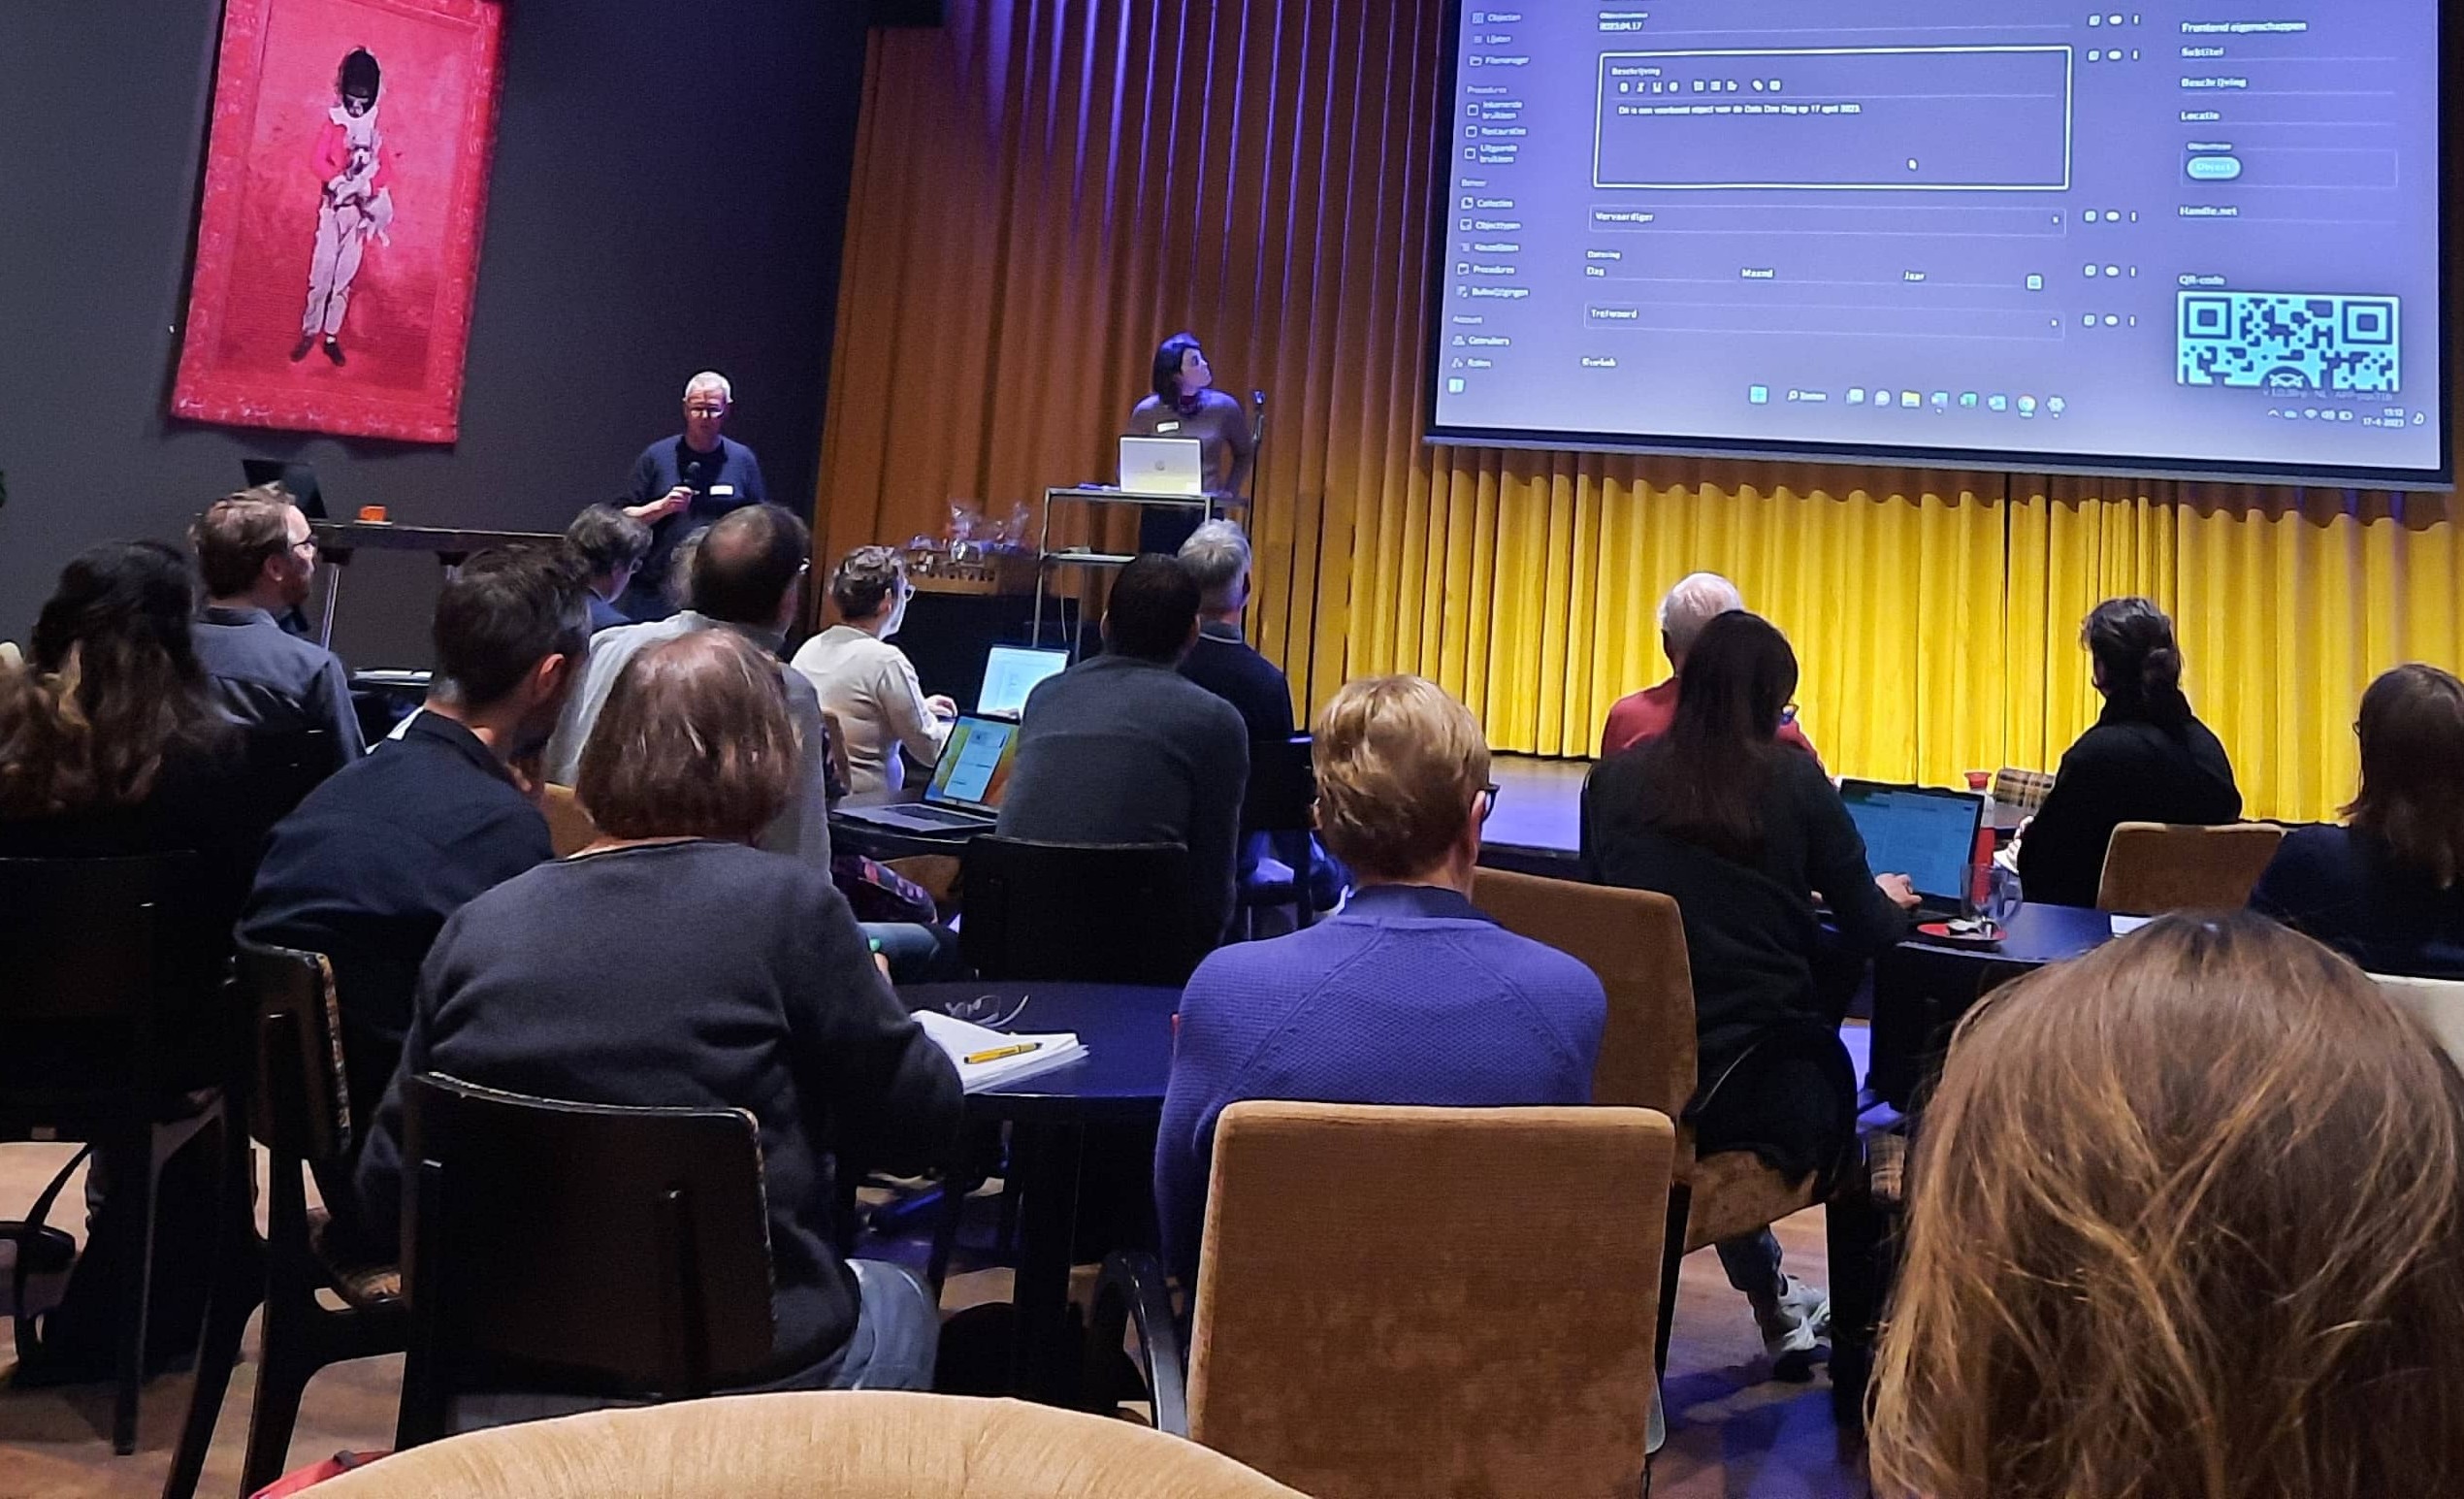 KLEKSI presented at the NDE 'DataActivityDay' by Susanne Groendendijk of the Eindhoven Museum